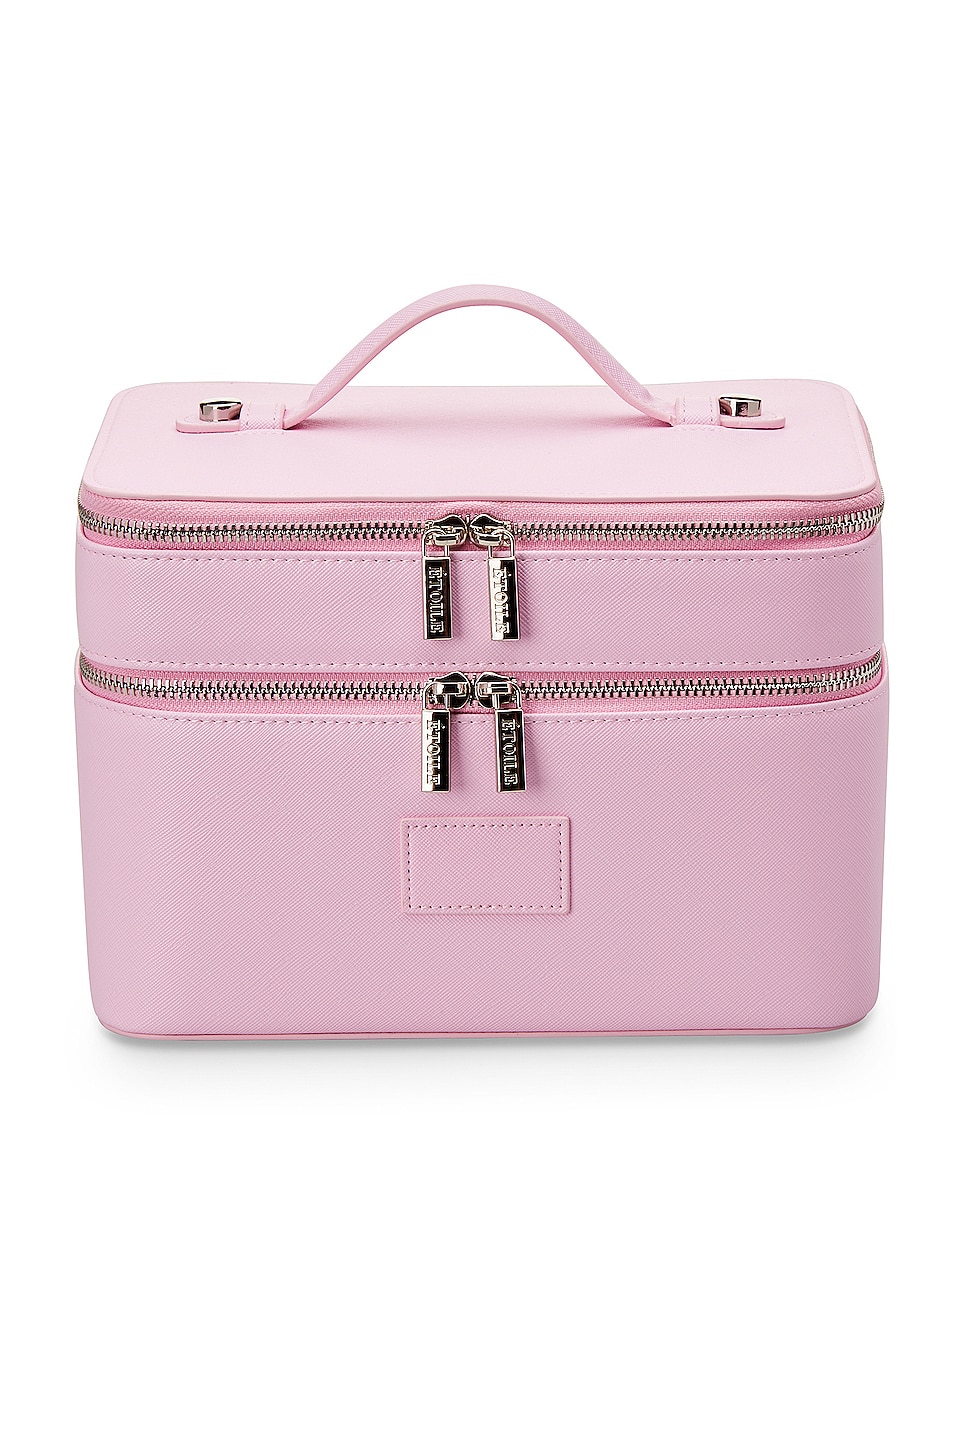 ETOILE COLLECTIVE Duo Vanity Case in Lavender Pink